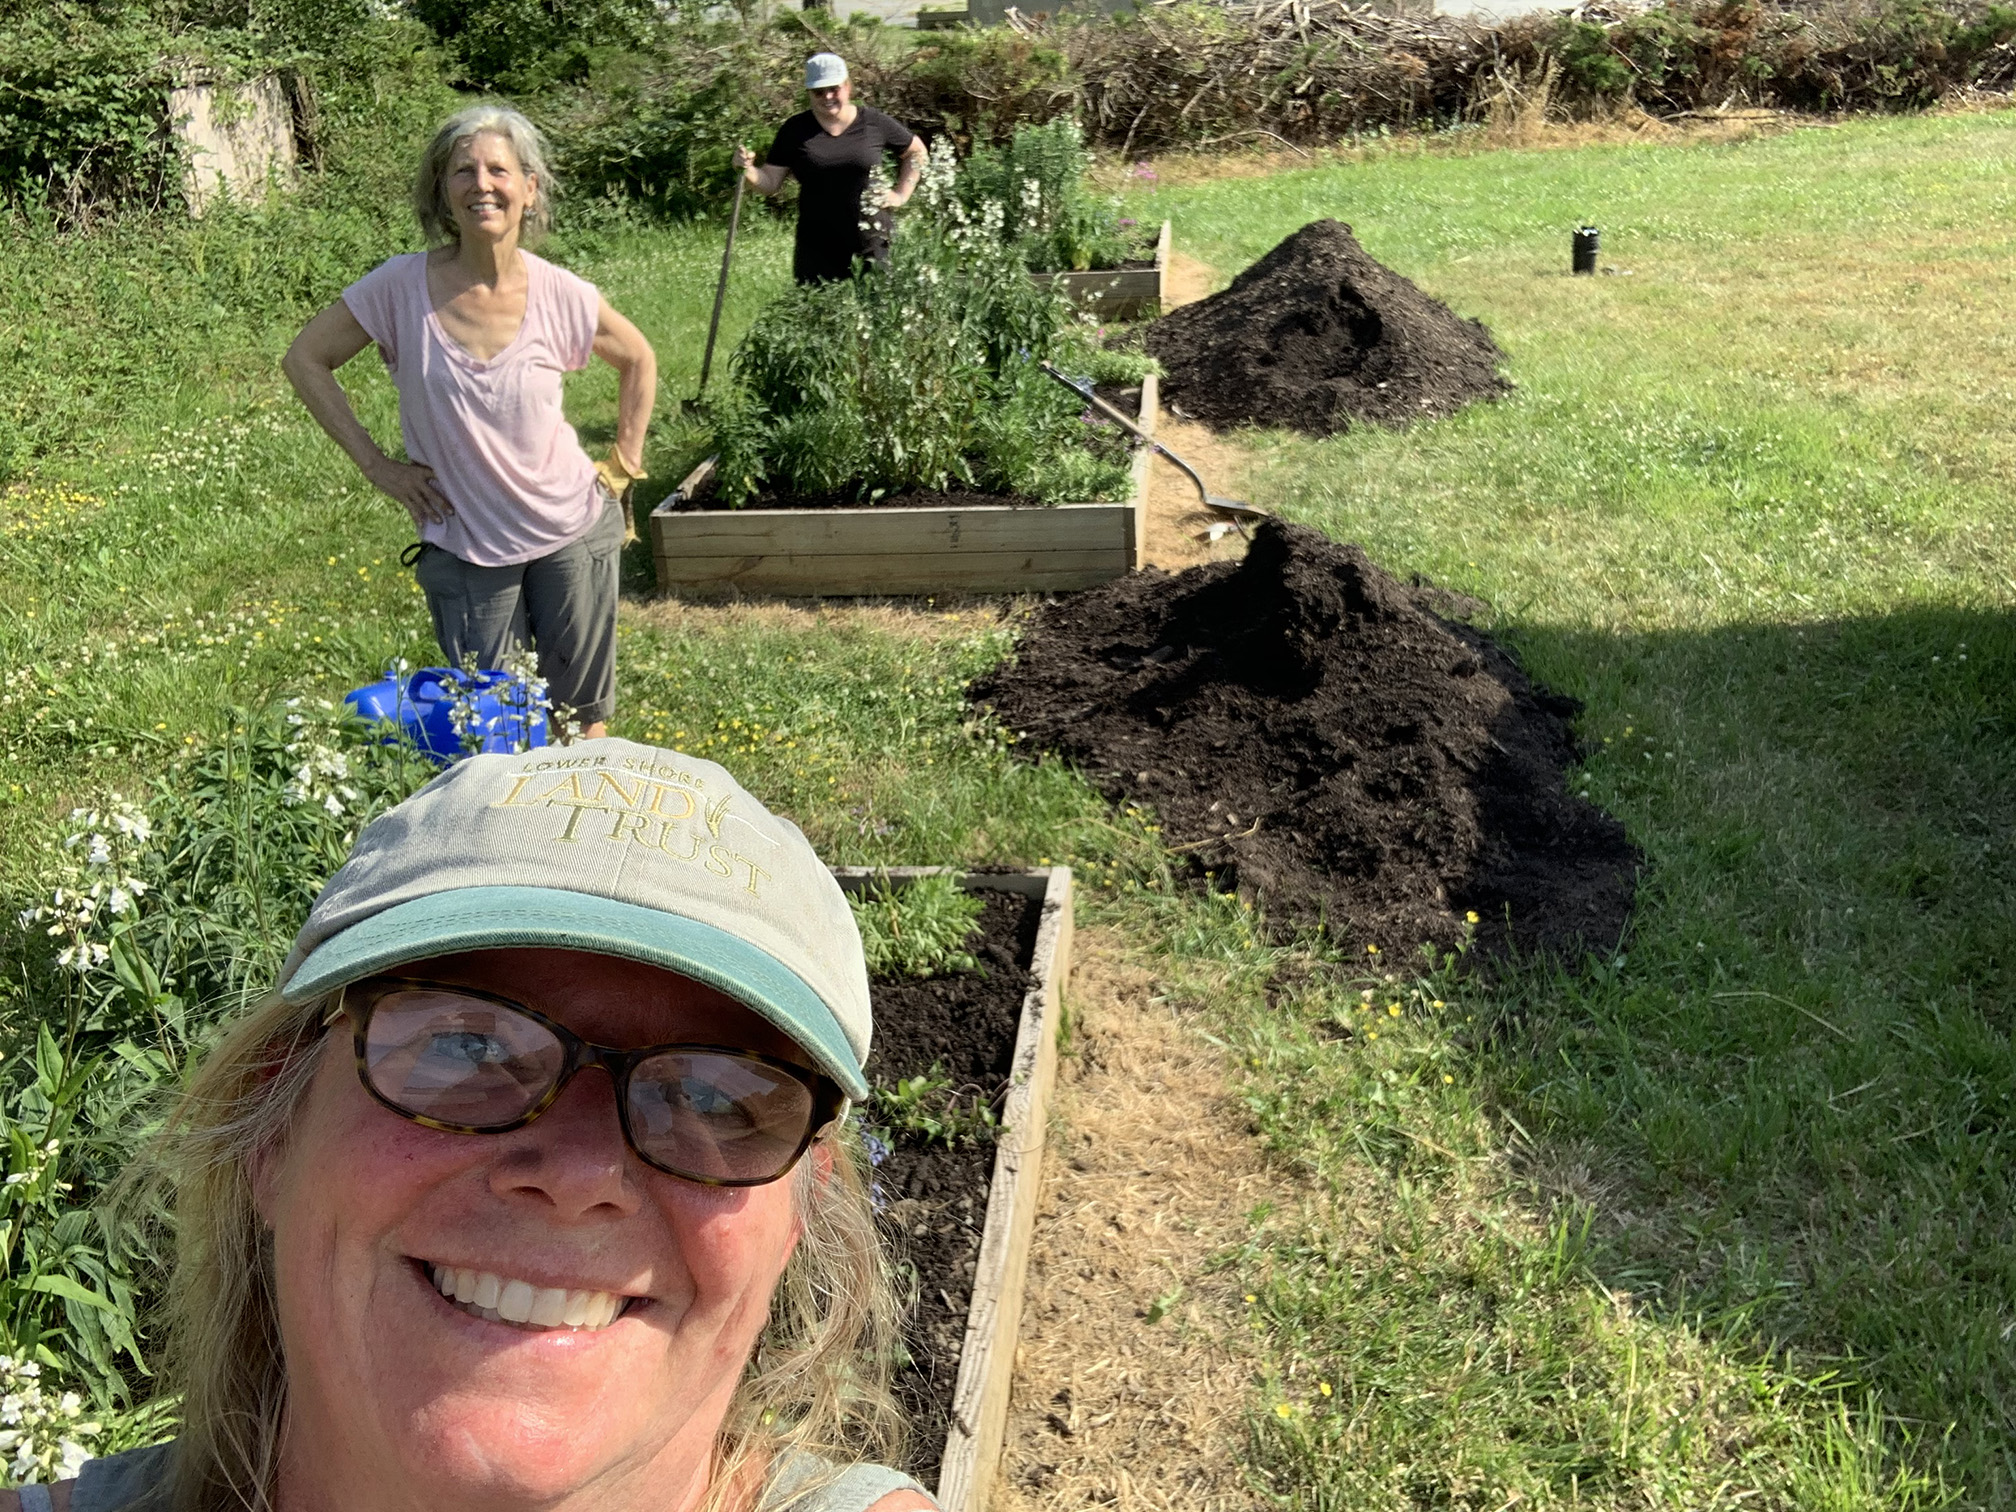 A self portrait of a woman wearing a green cap and with brown-rimmed glasses. Be hind her are two women smiling at the camera beside the raise beds they have been working to plant.